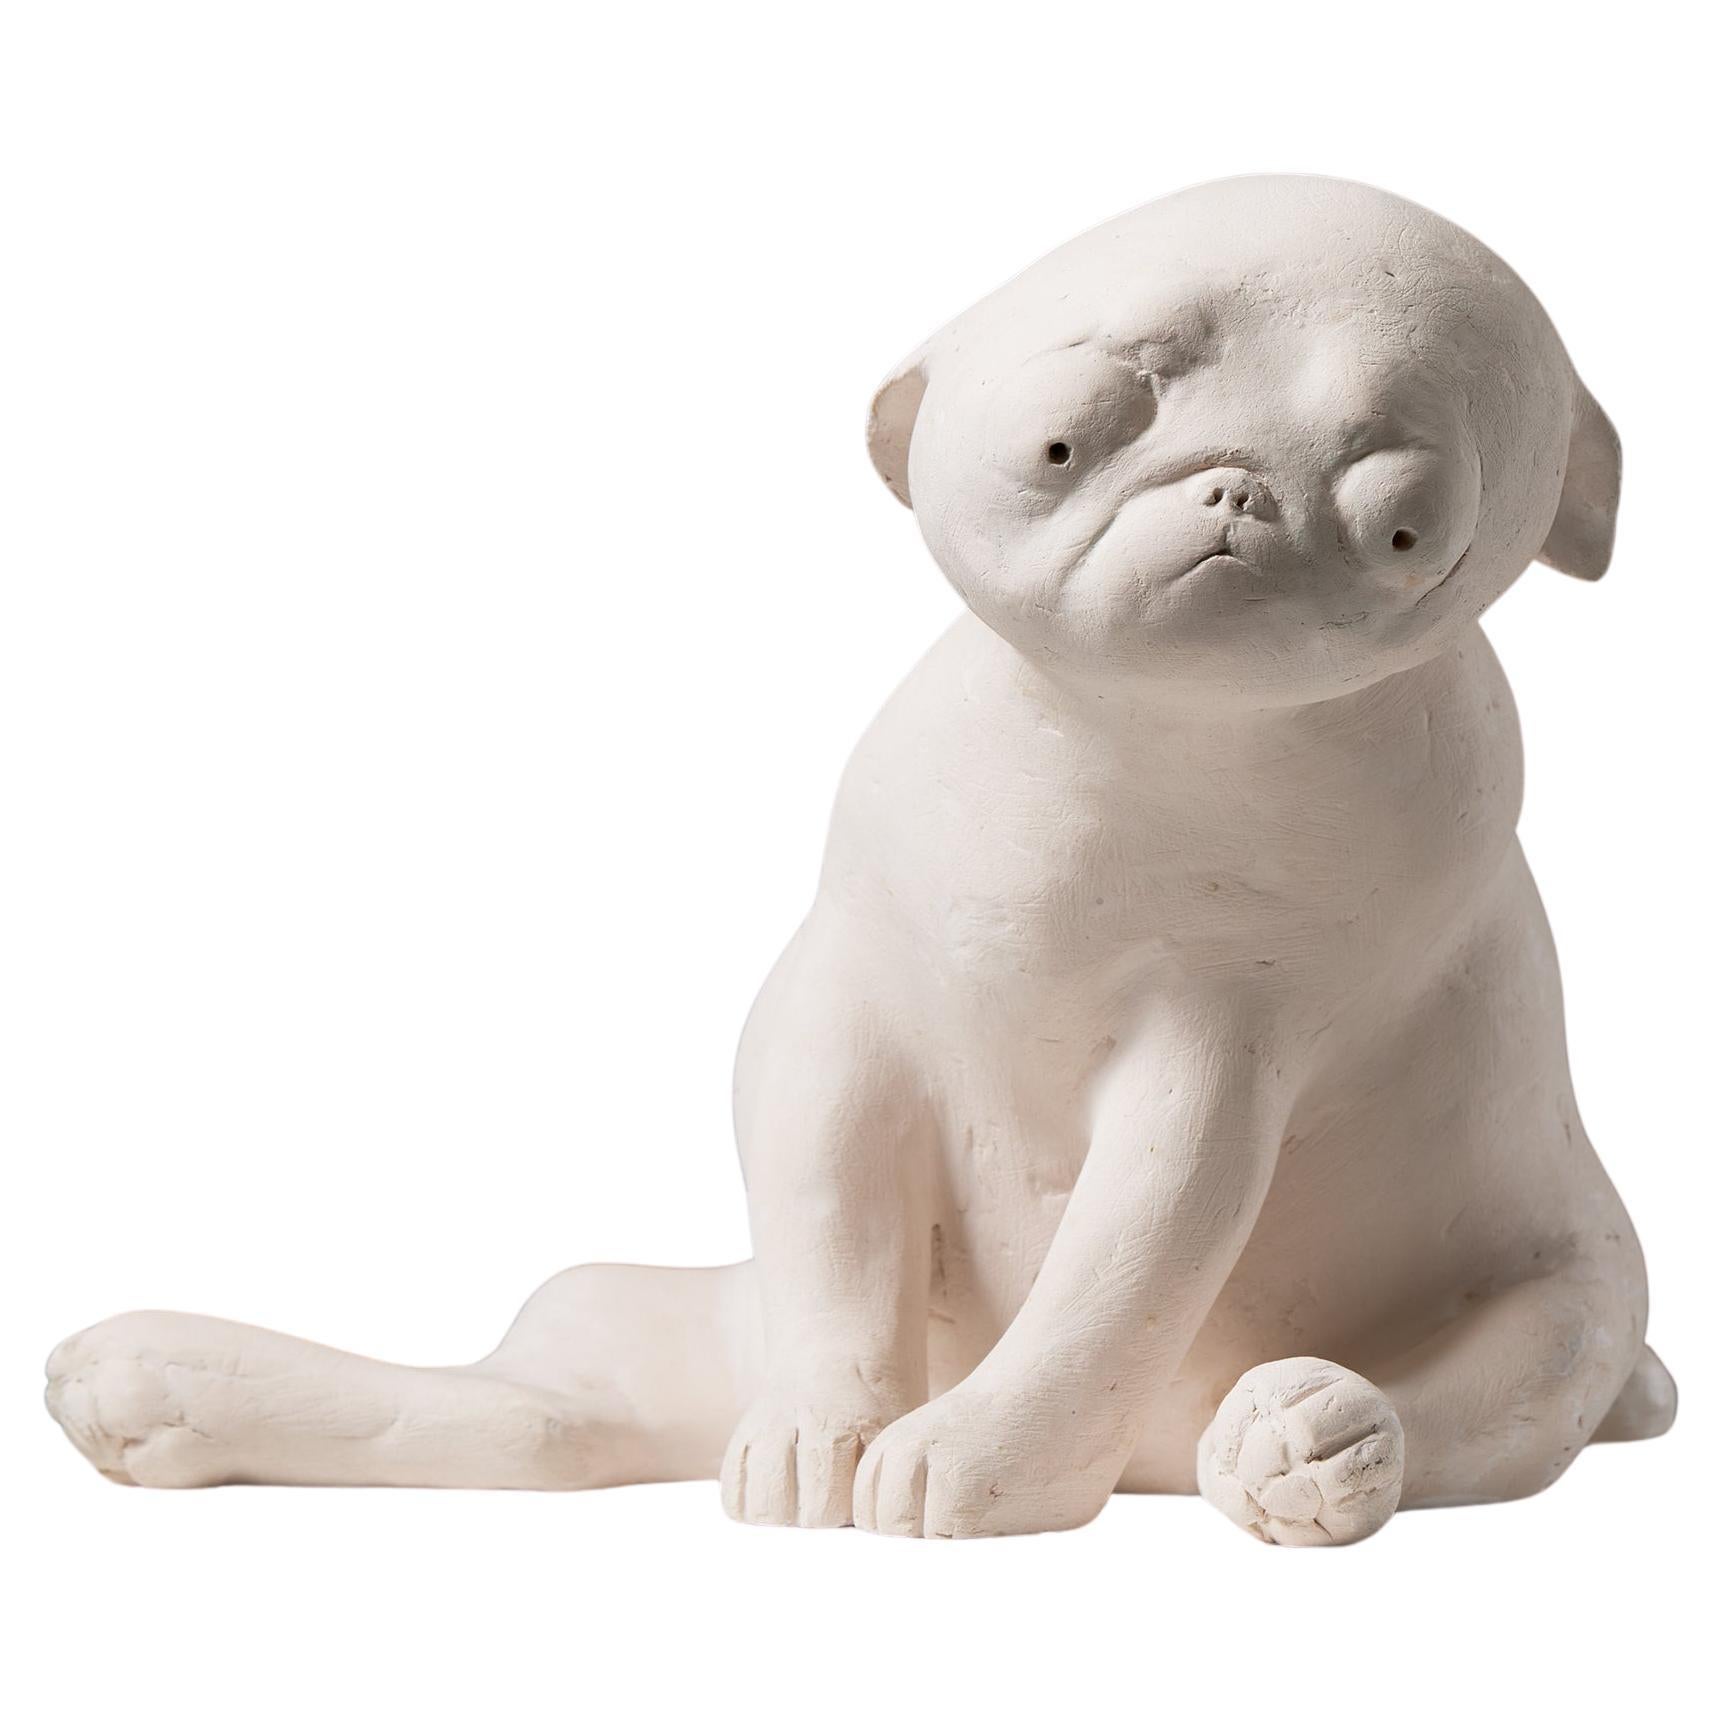 Sculpture 'Puppy in the World' by Sonja Petterson, Sweden, 2000, Pug, Dog